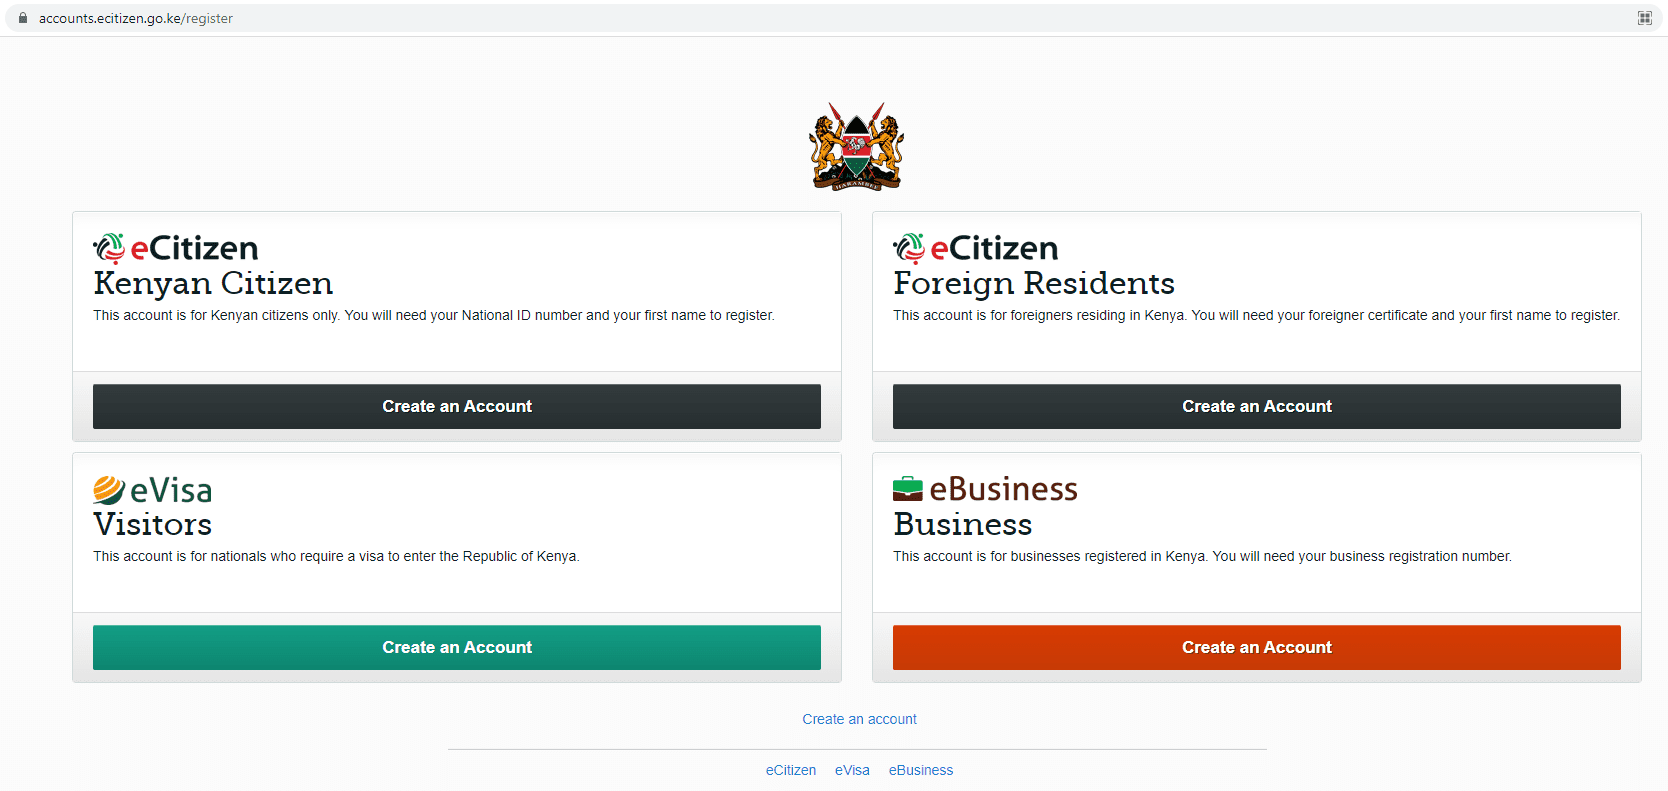 The various options to register in the eCitizen website Toggle navigation for the government services you want.